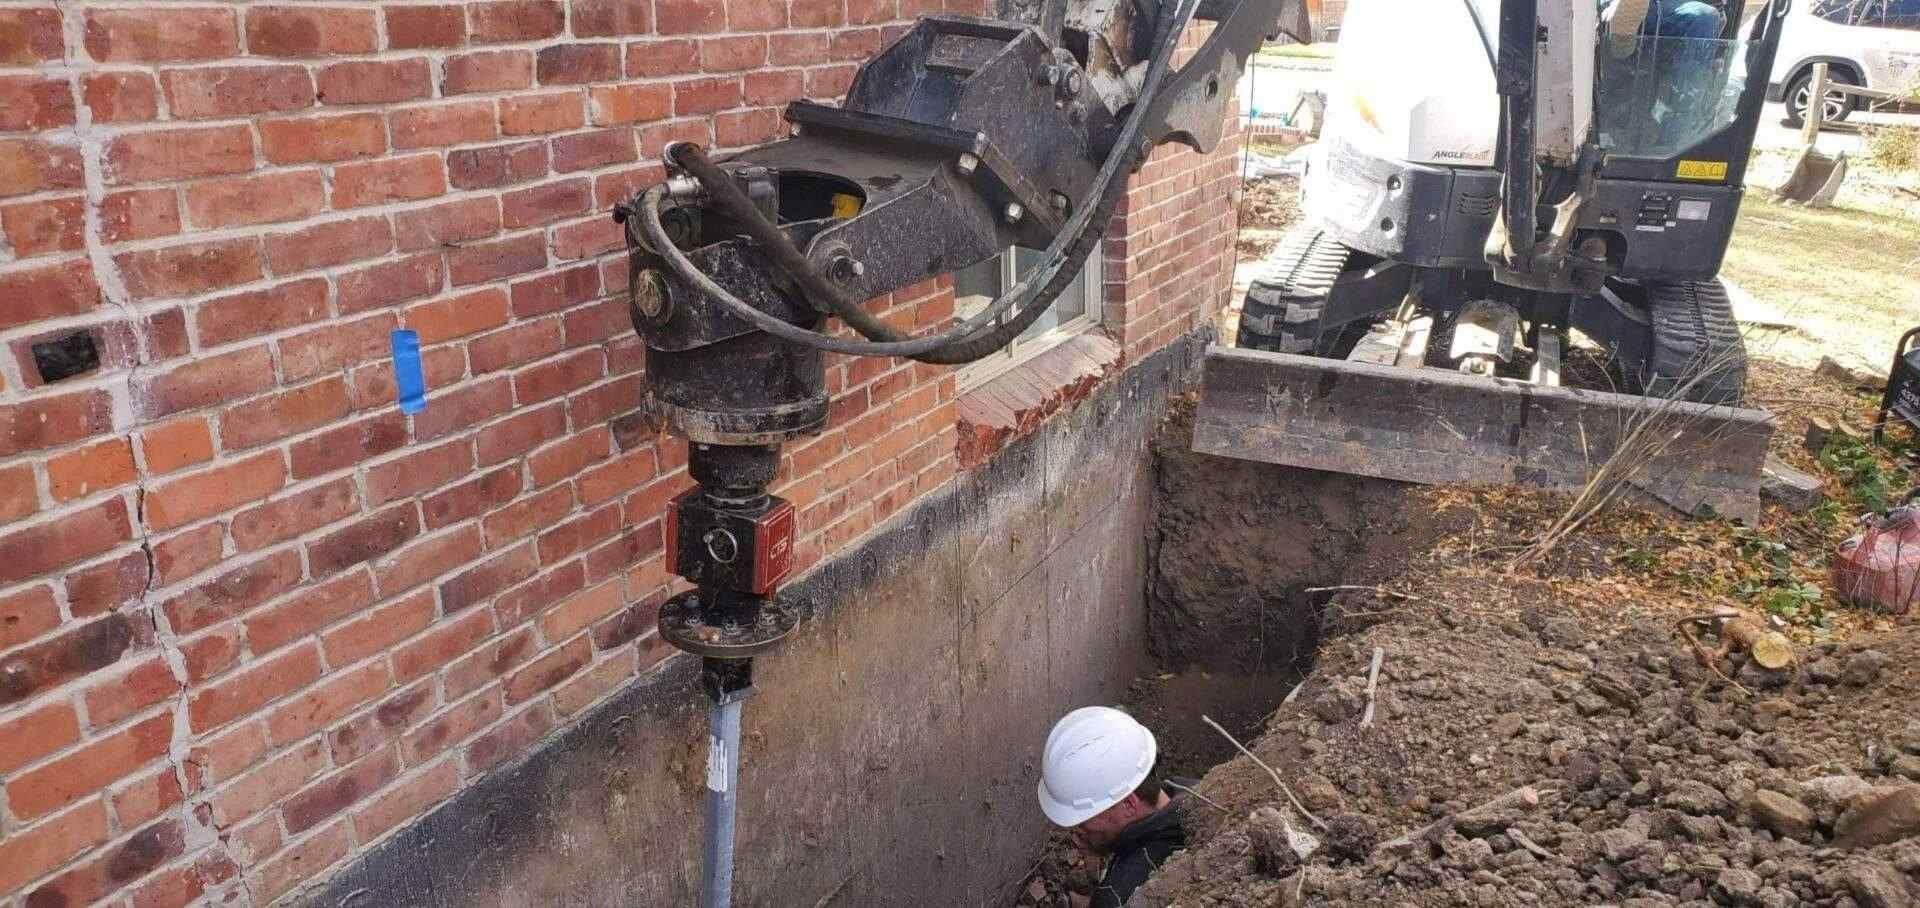 Helical Pier Installation In Hole By Excavator For House Foundation